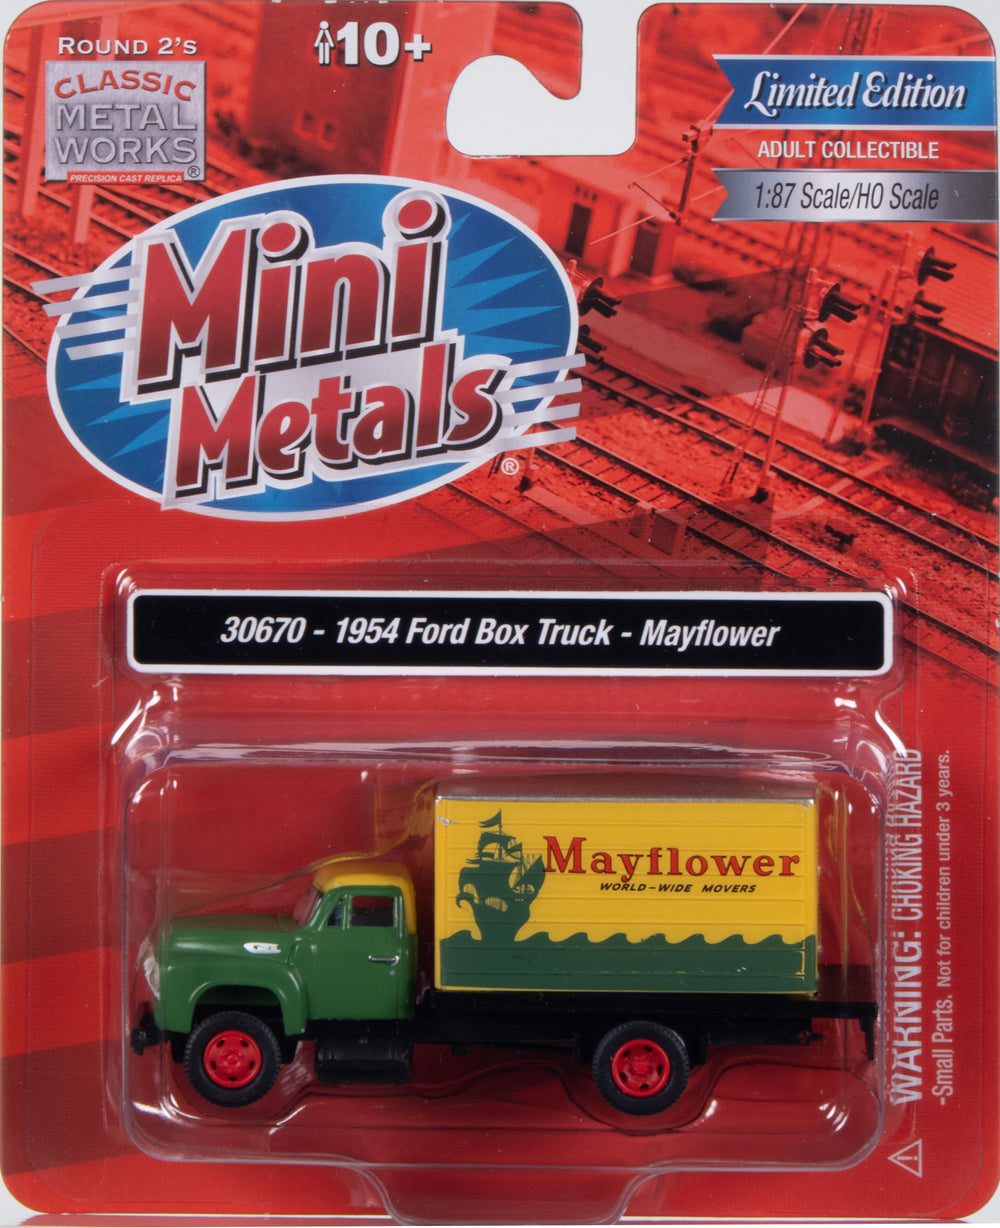 Classic Metal Works 1954 Ford Box Truck (Mayflower) 1:87 HO Scale